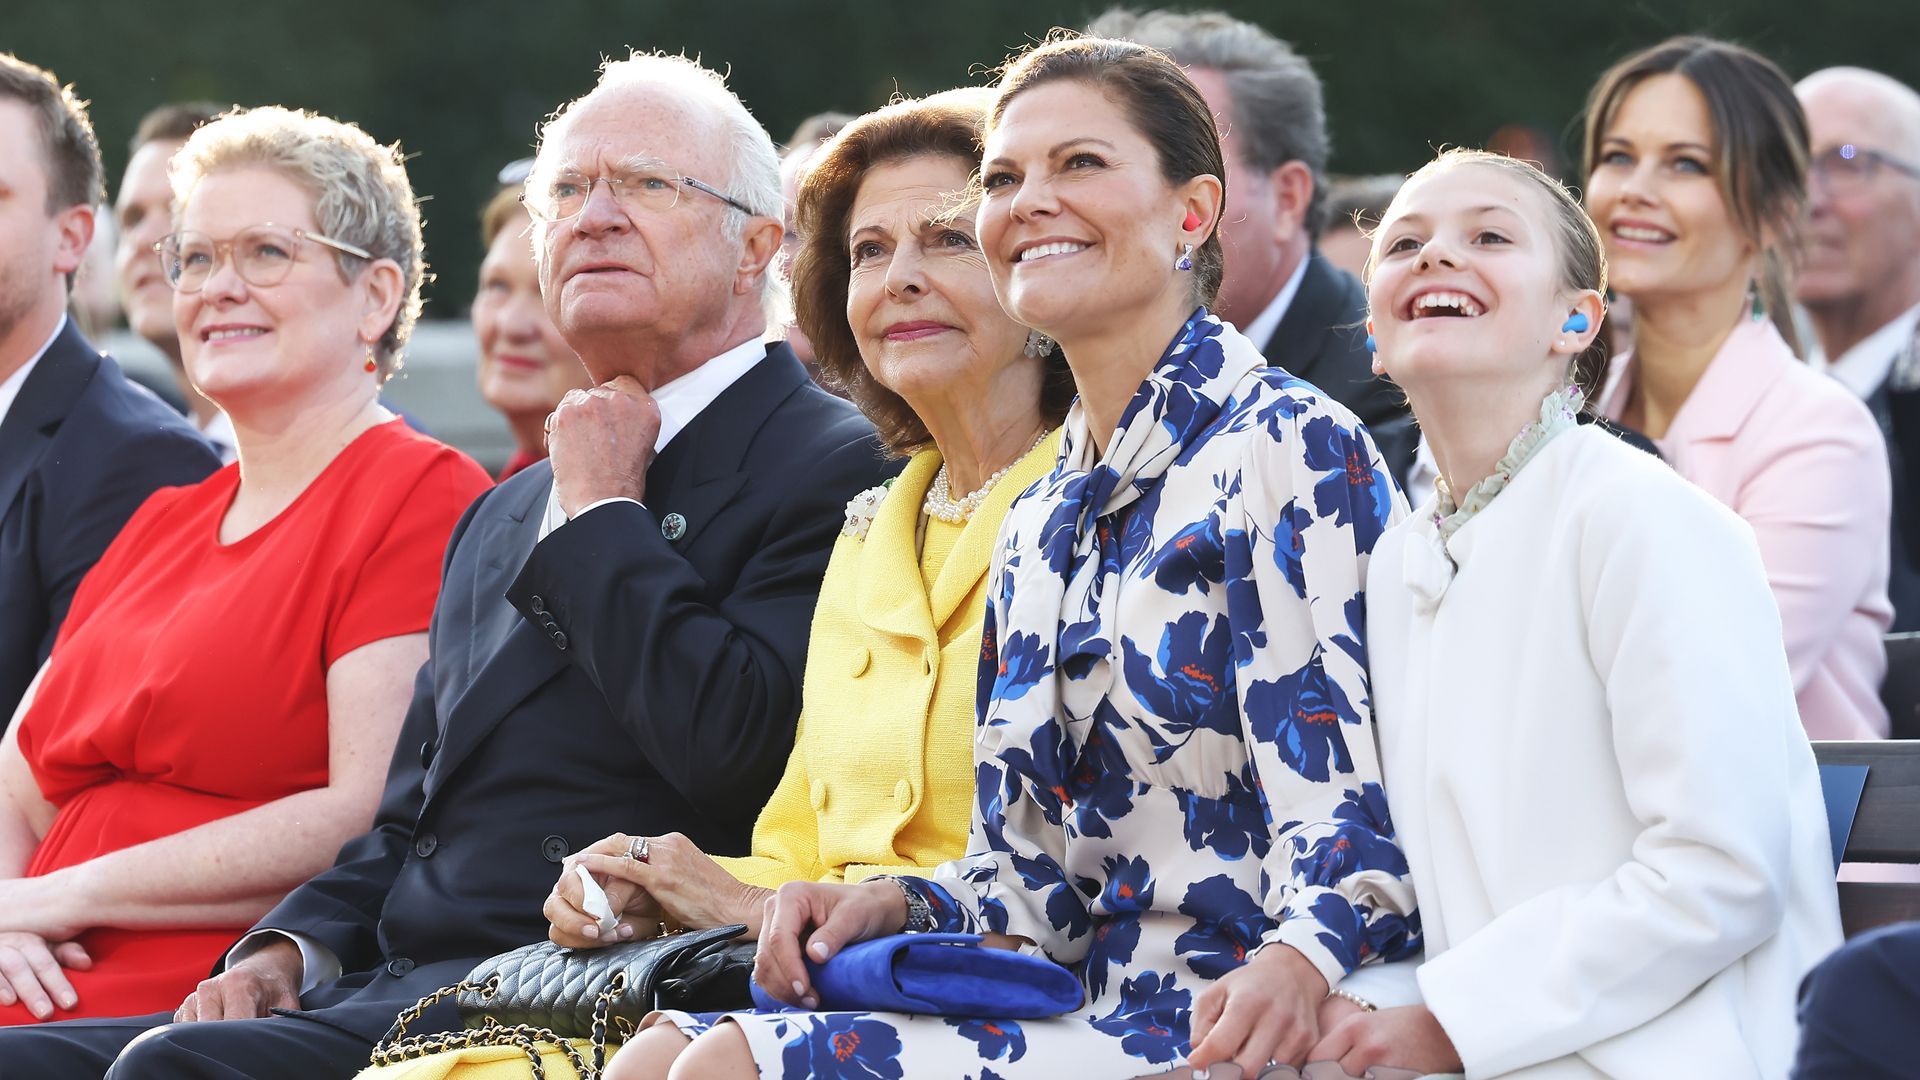 Swedish royal family mark special celebration ahead of Christmas - details